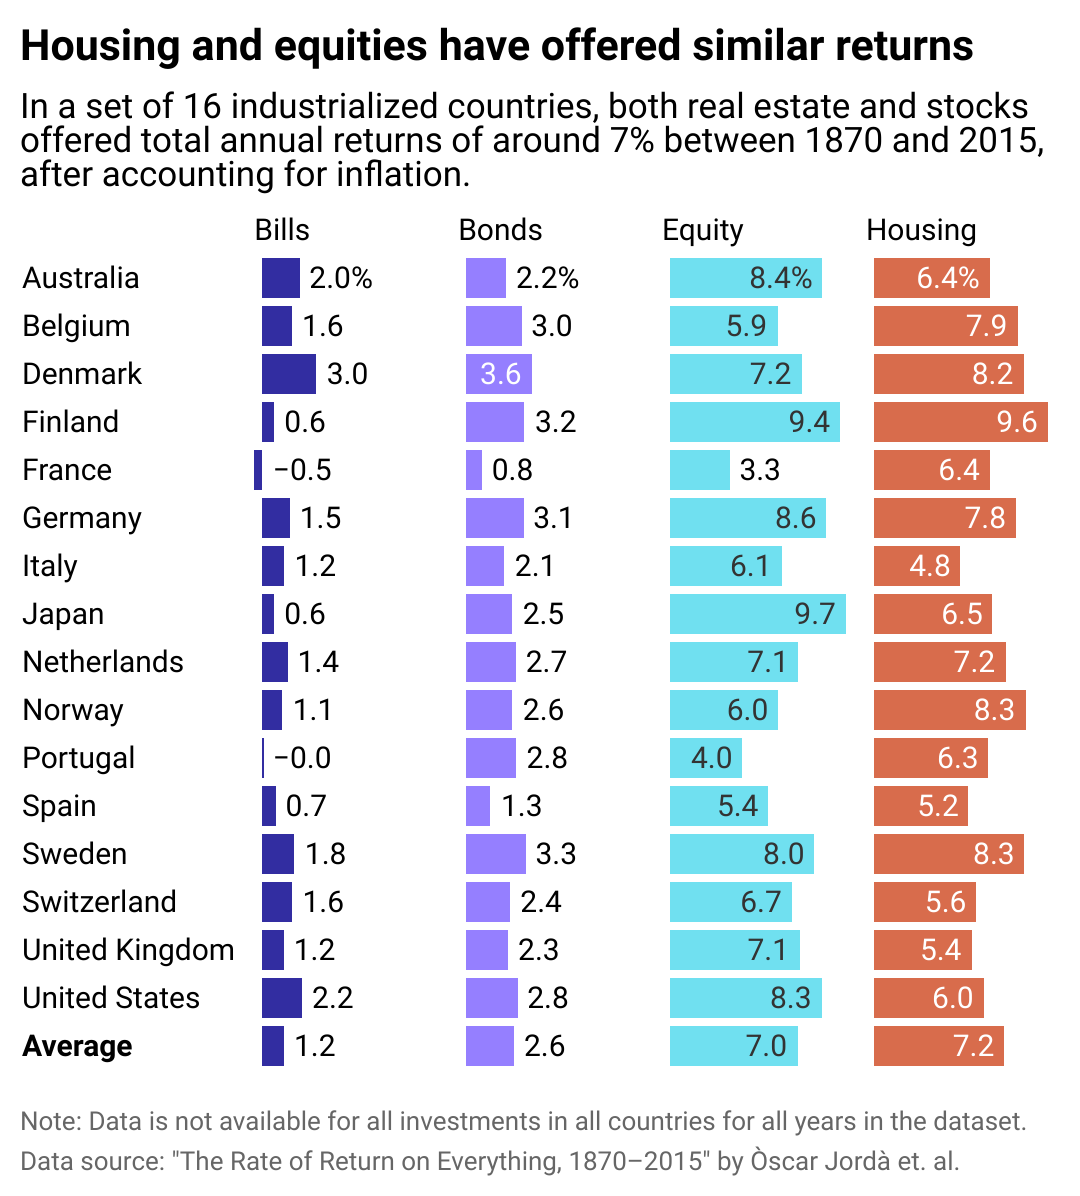 A chart showing the annual returns to real estate, stocks, bonds, and bills in 16 major countries between 1870 and 2015.